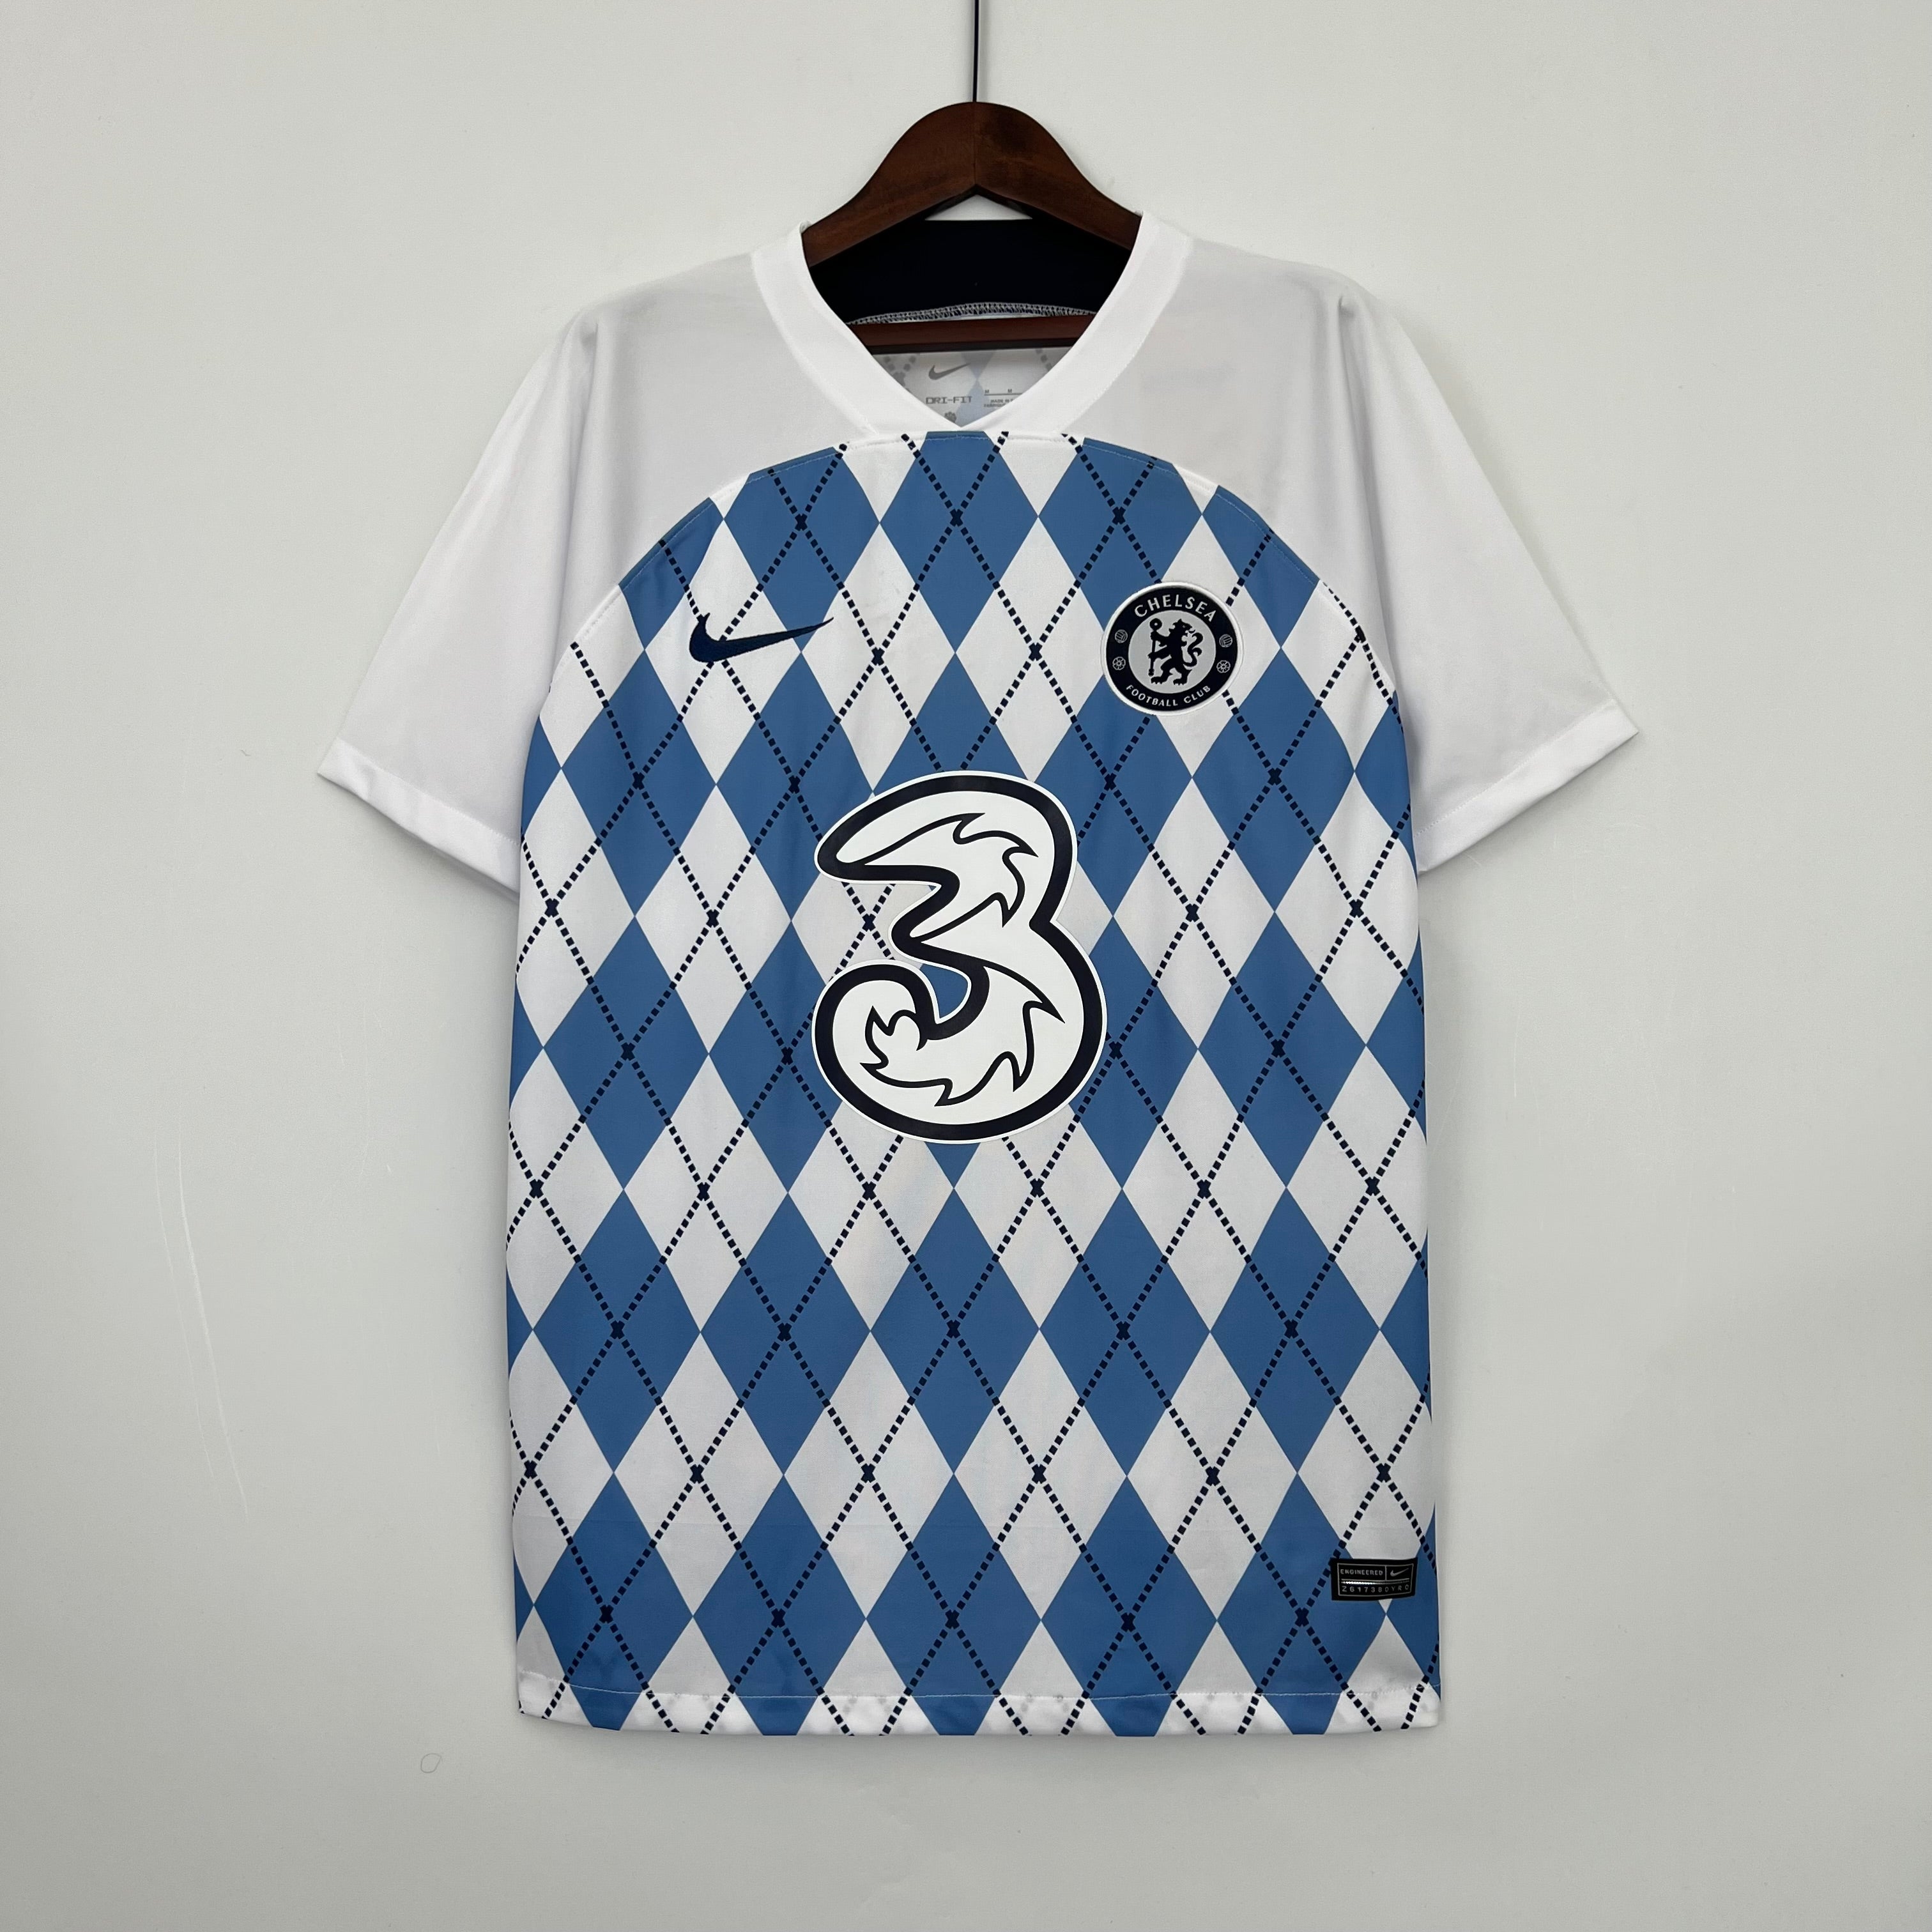 Chelsea - Special Edition 23/24